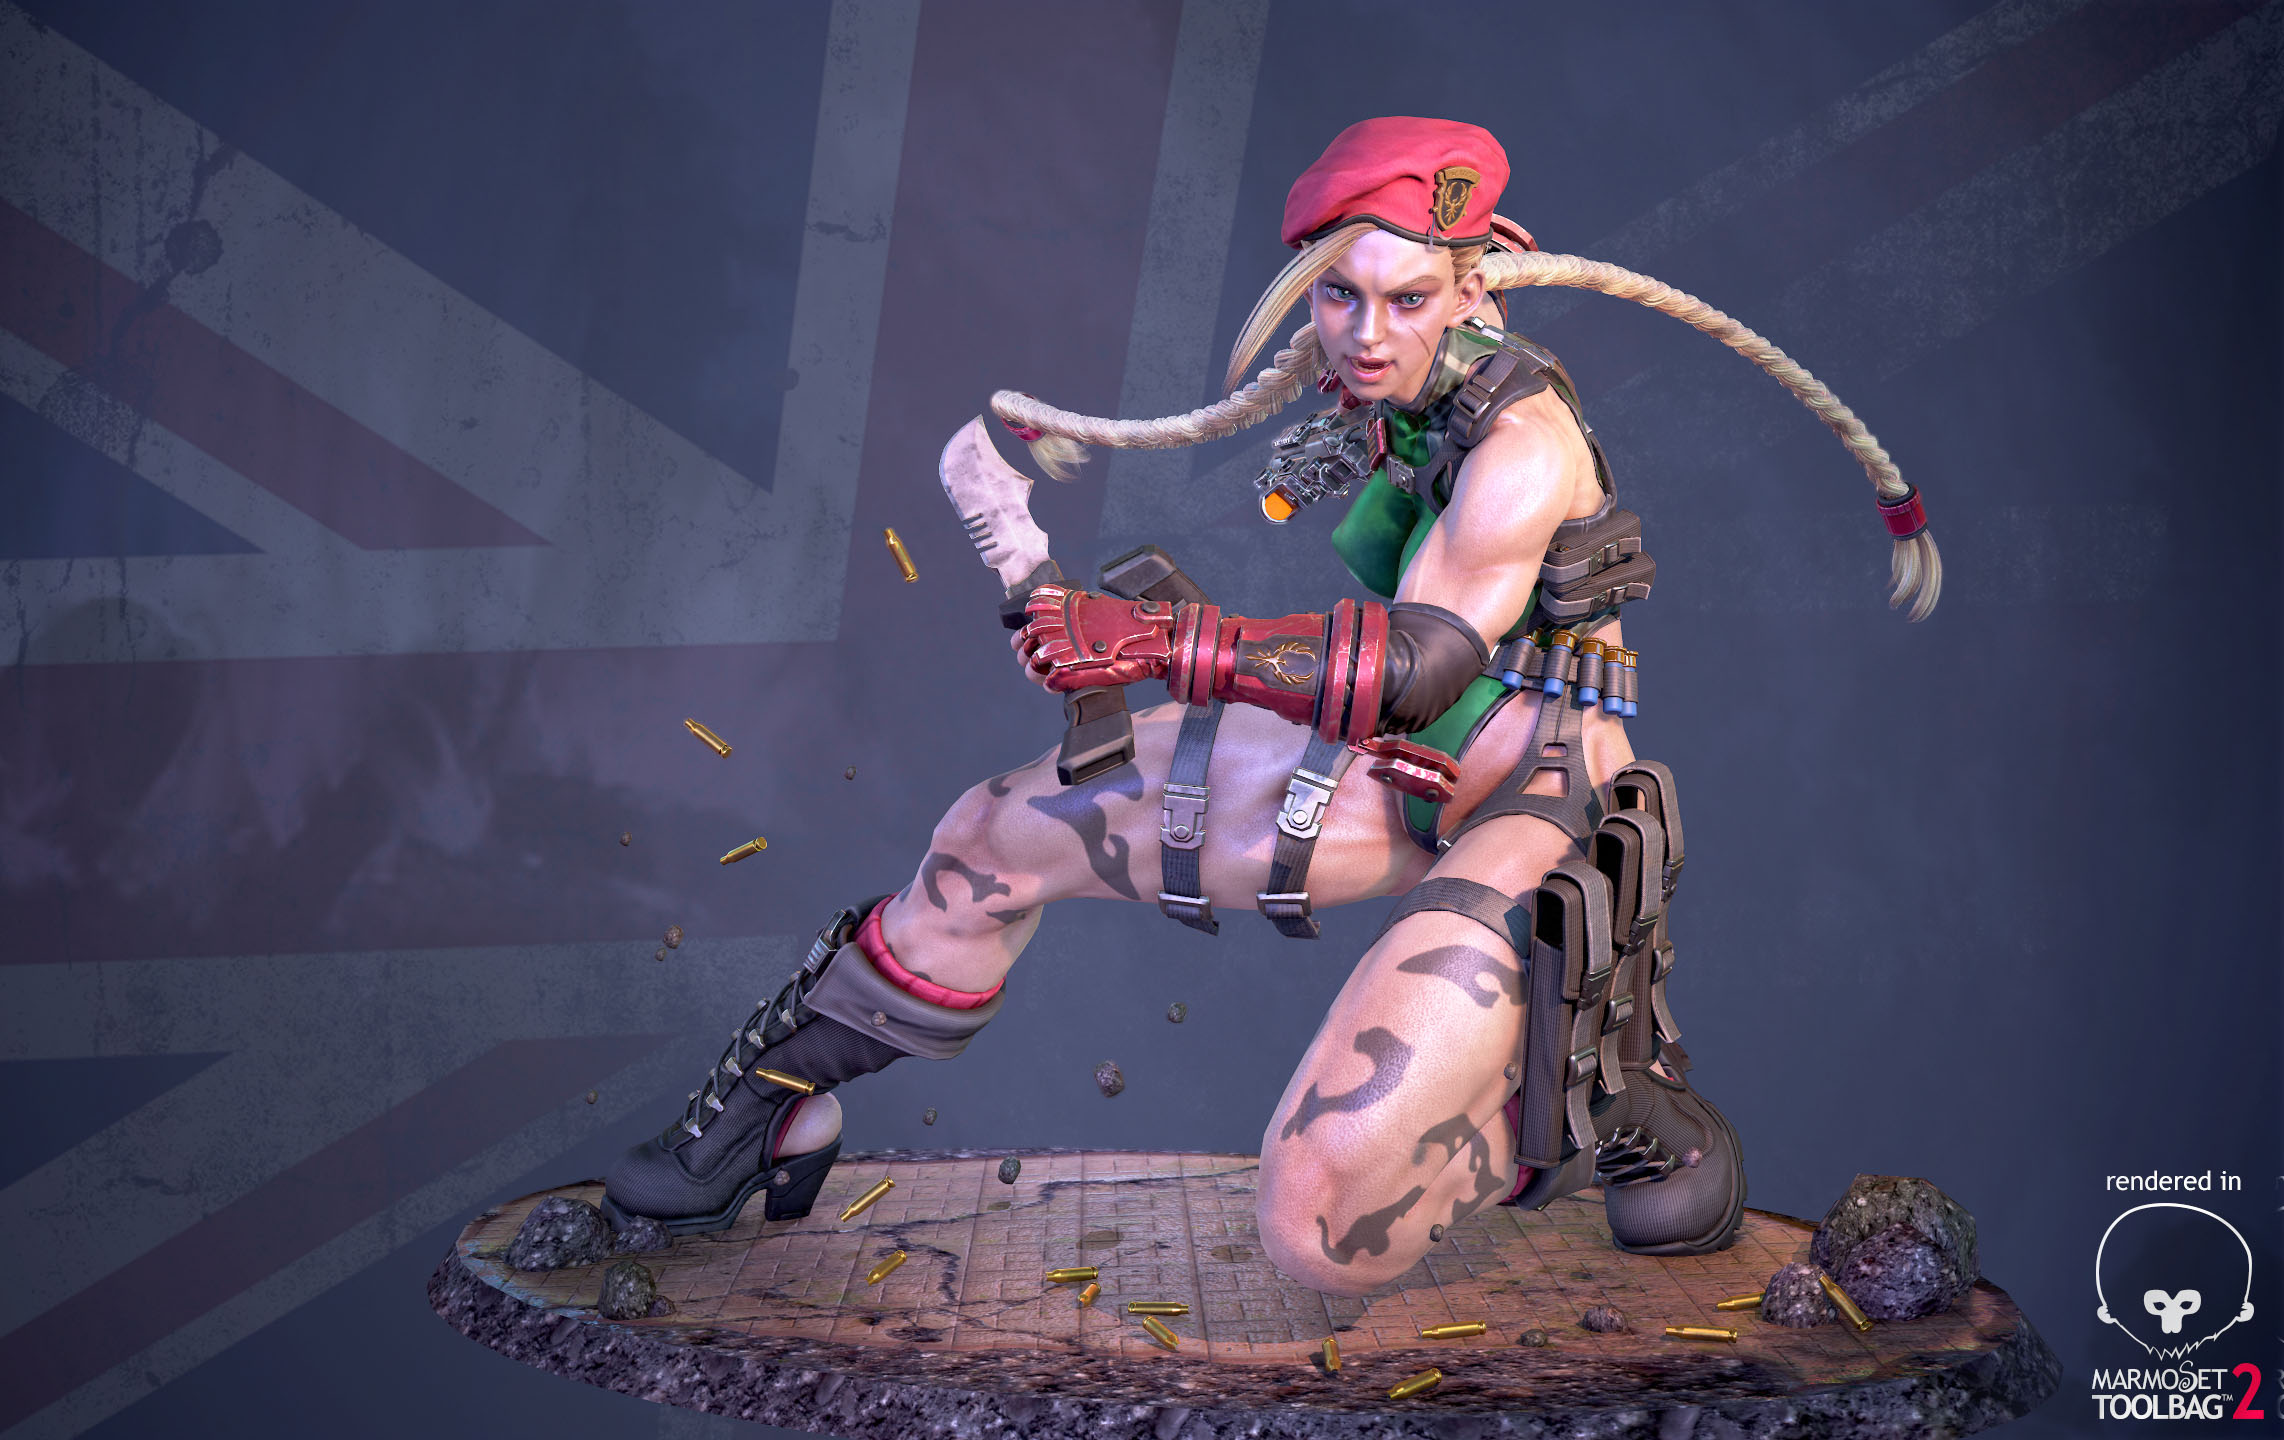 Cammy, the female character in the Street Fighter series